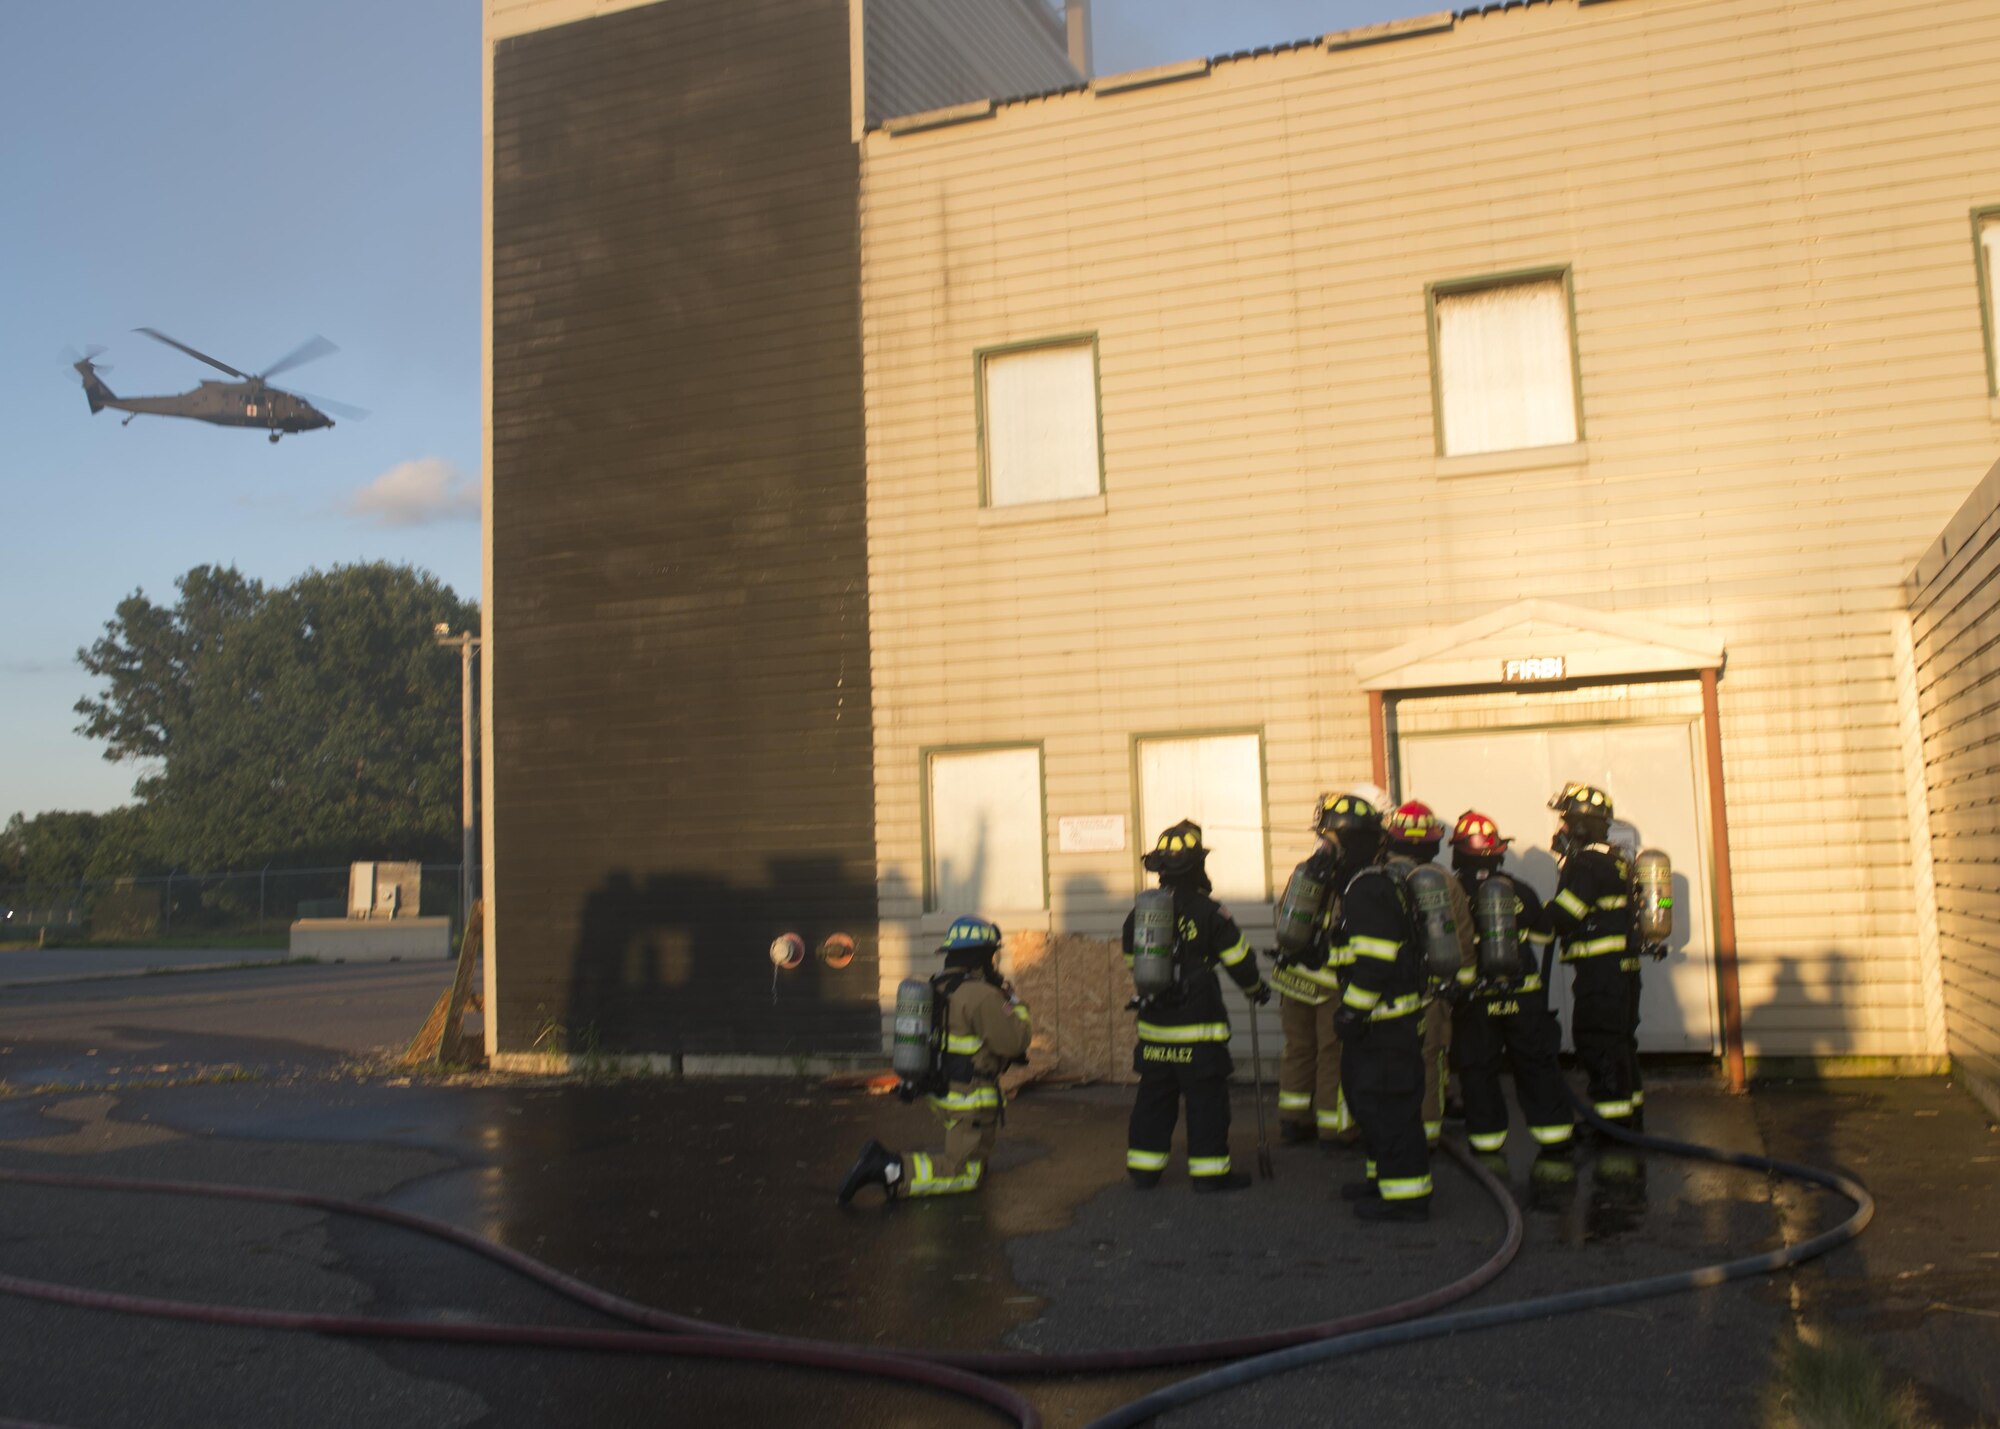 Firefighters throughout the Air Force Reserve prepare to enter building during exercise Patriot Warrior Aug. 17, 2016, Sparta/Fort McCoy Airport, Wis. Patriot Warrior allows Air Reserve fire fighting units from throughout the U.S. to train together and learn from professionals throughout the career field in a deployment-style environment. (U.S. Air Force Photo/ Tech. Sgt. Nathan Rivard)